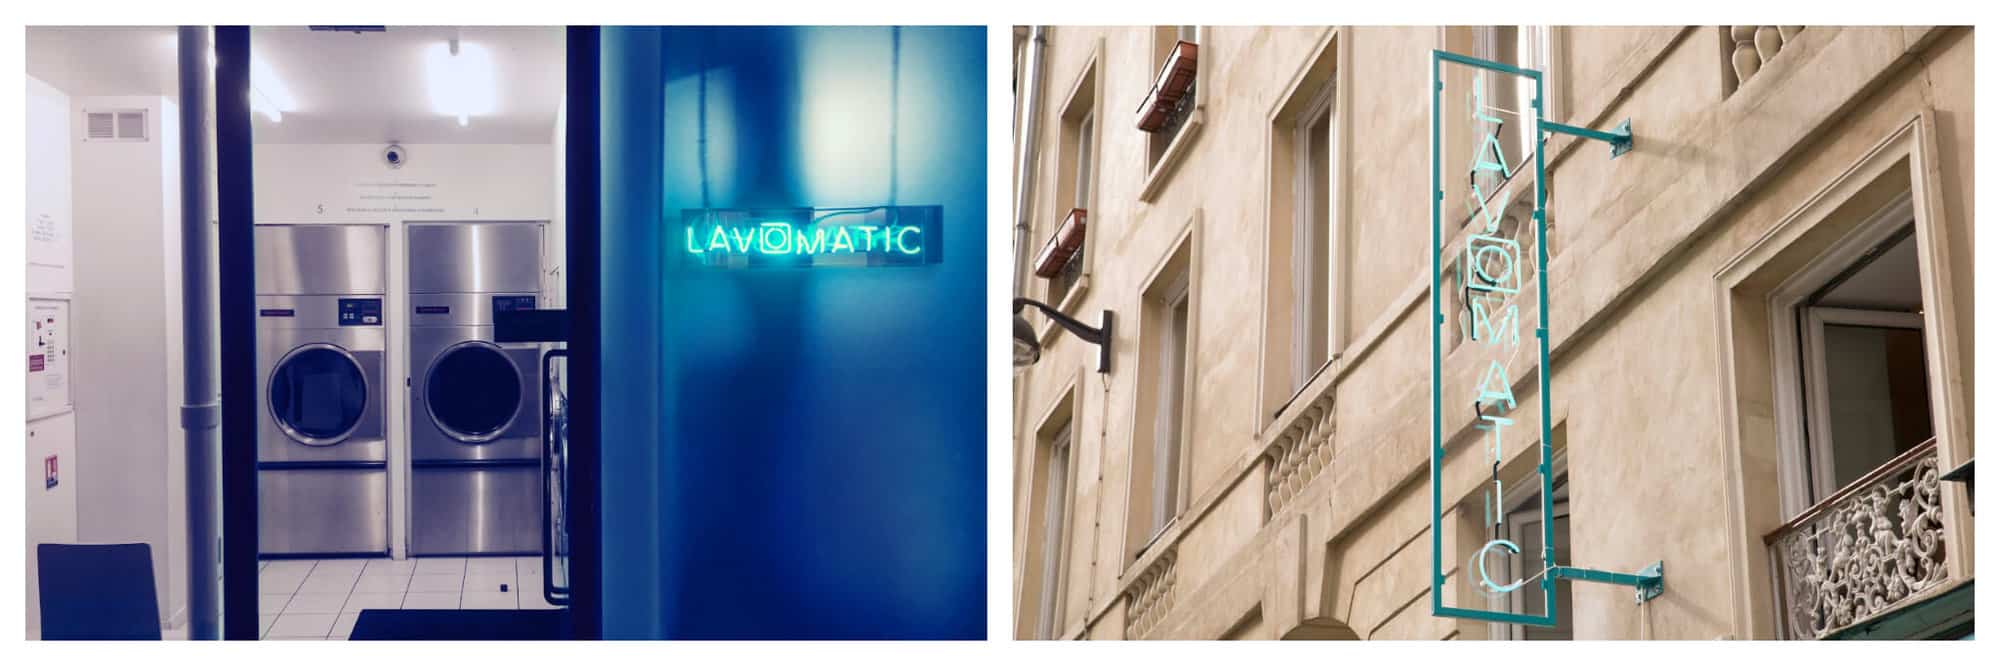 the entrance to the bar in Paris "Lavomatic." I looks like a laundromat, but there is a bright blue neon sign to the right that says "Lavomatic." There are two washing machines visible. Right: The exterior of "Lavomatic." It is a Parisian stone building and the sign is blue and neon.